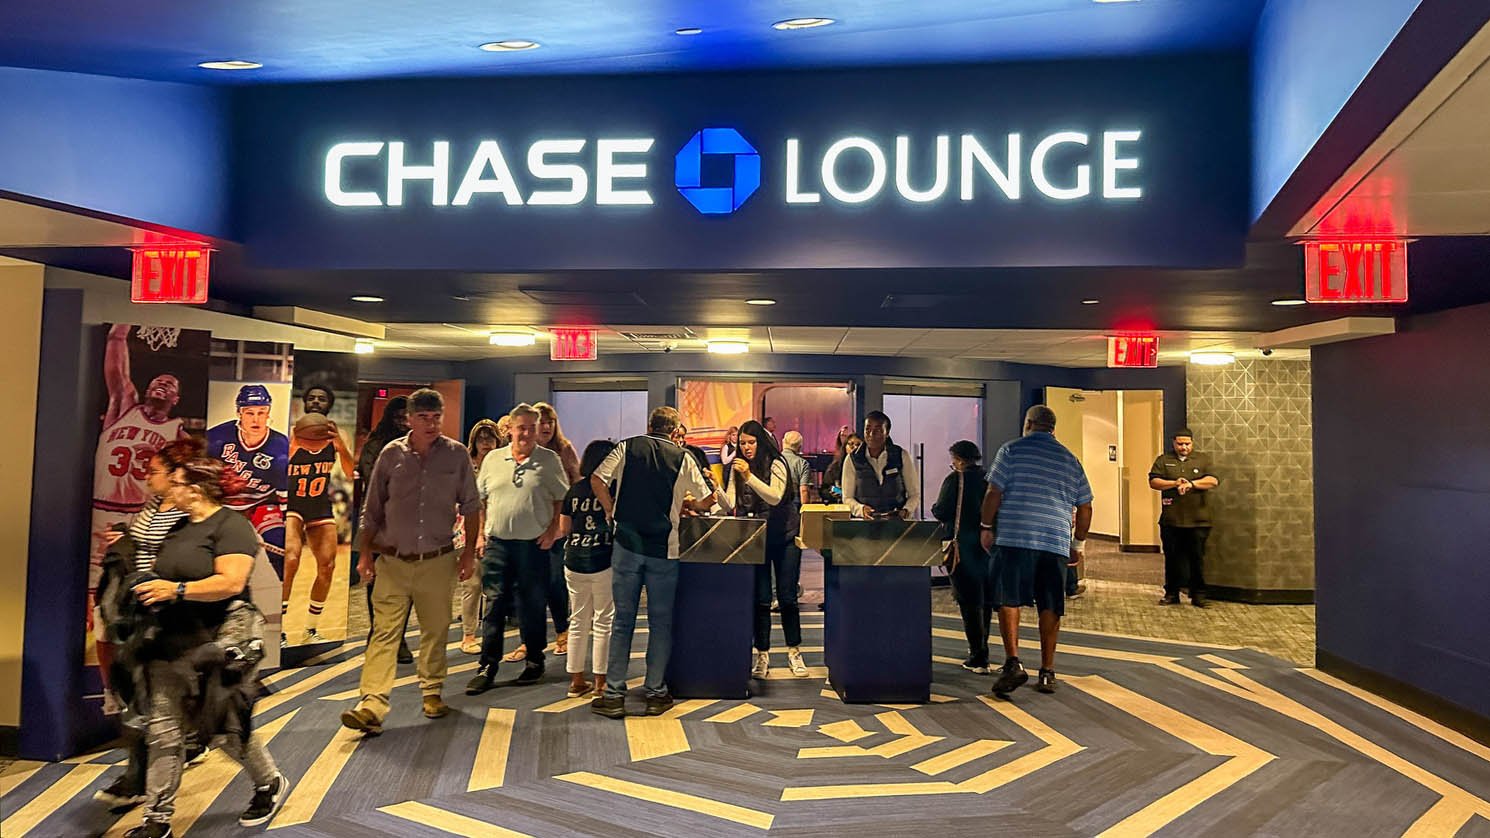 The.entrance to the Chase Lounge